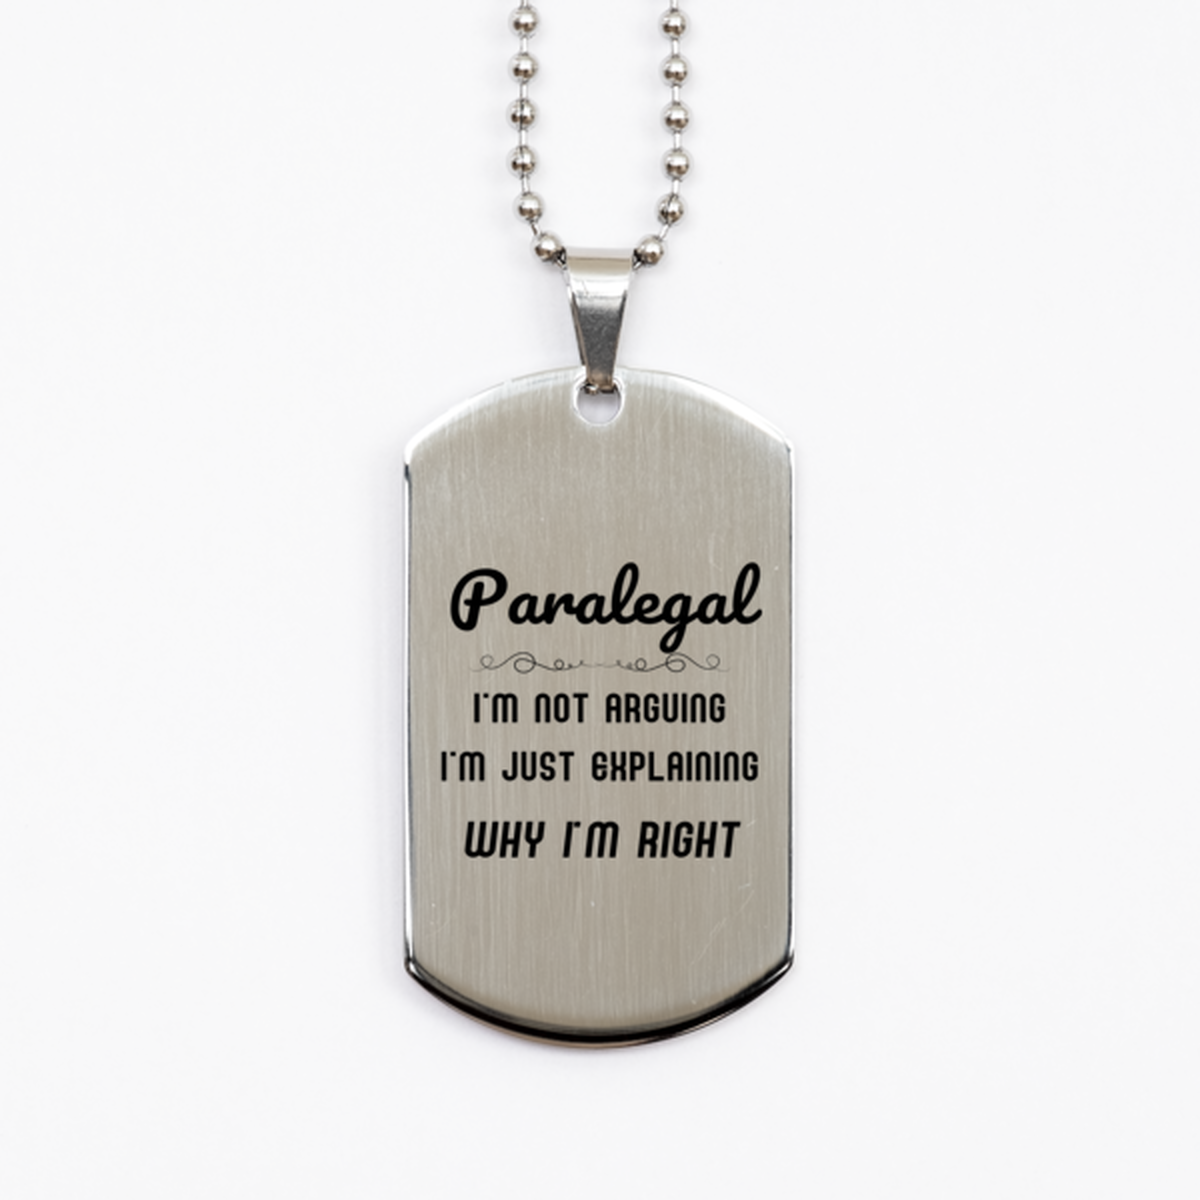 Paralegal I'm not Arguing. I'm Just Explaining Why I'm RIGHT Silver Dog Tag, Funny Saying Quote Paralegal Gifts For Paralegal Graduation Birthday Christmas Gifts for Men Women Coworker